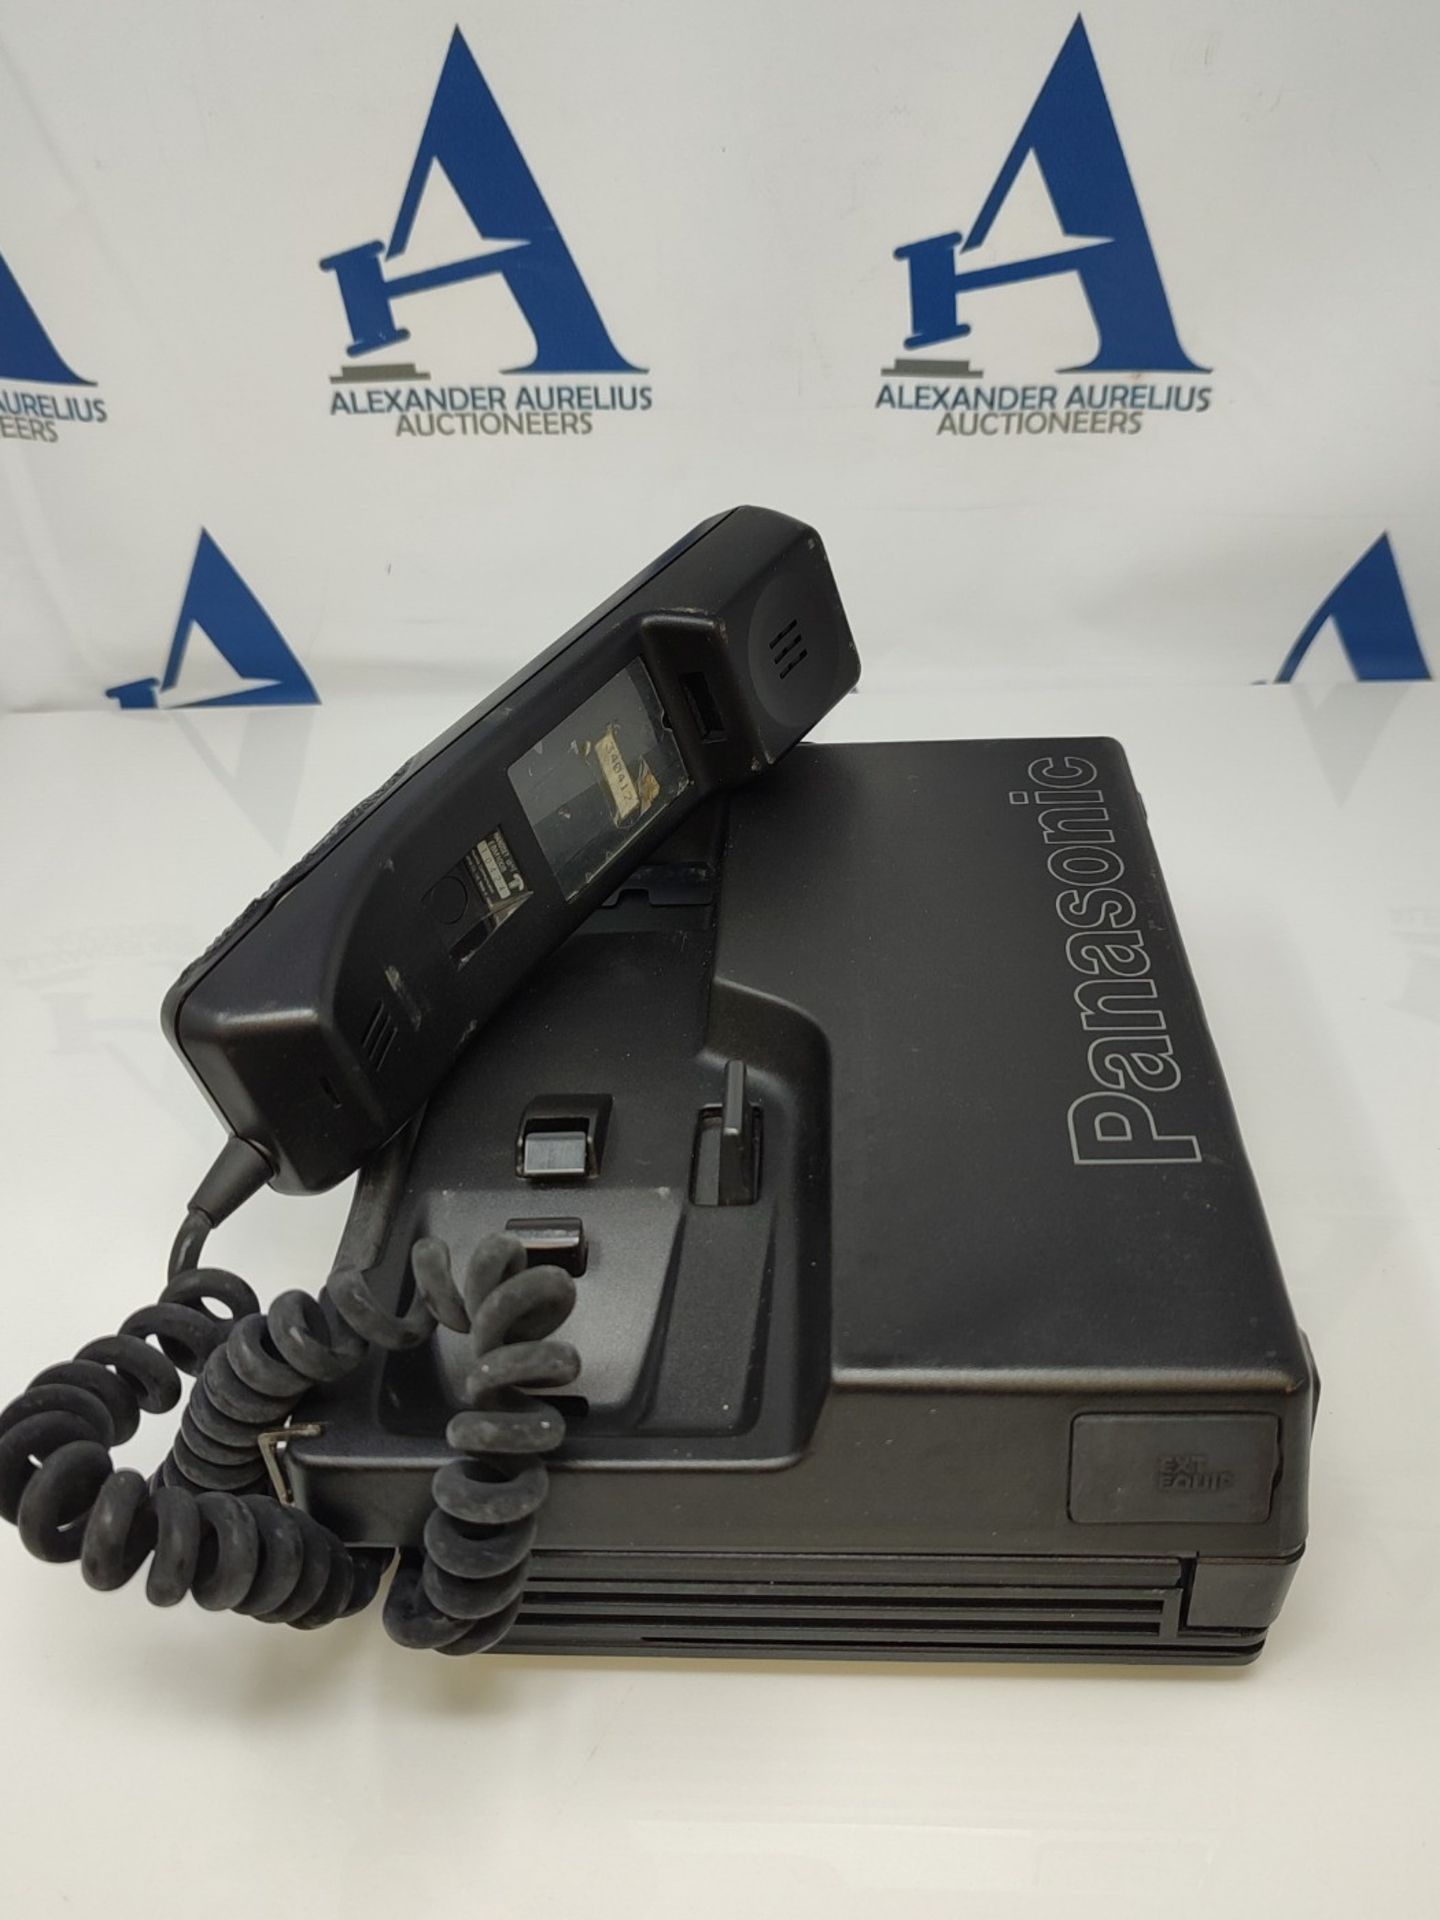 Panasonic Mobile Phone one of the 1st type EF-6151EB - Image 4 of 4